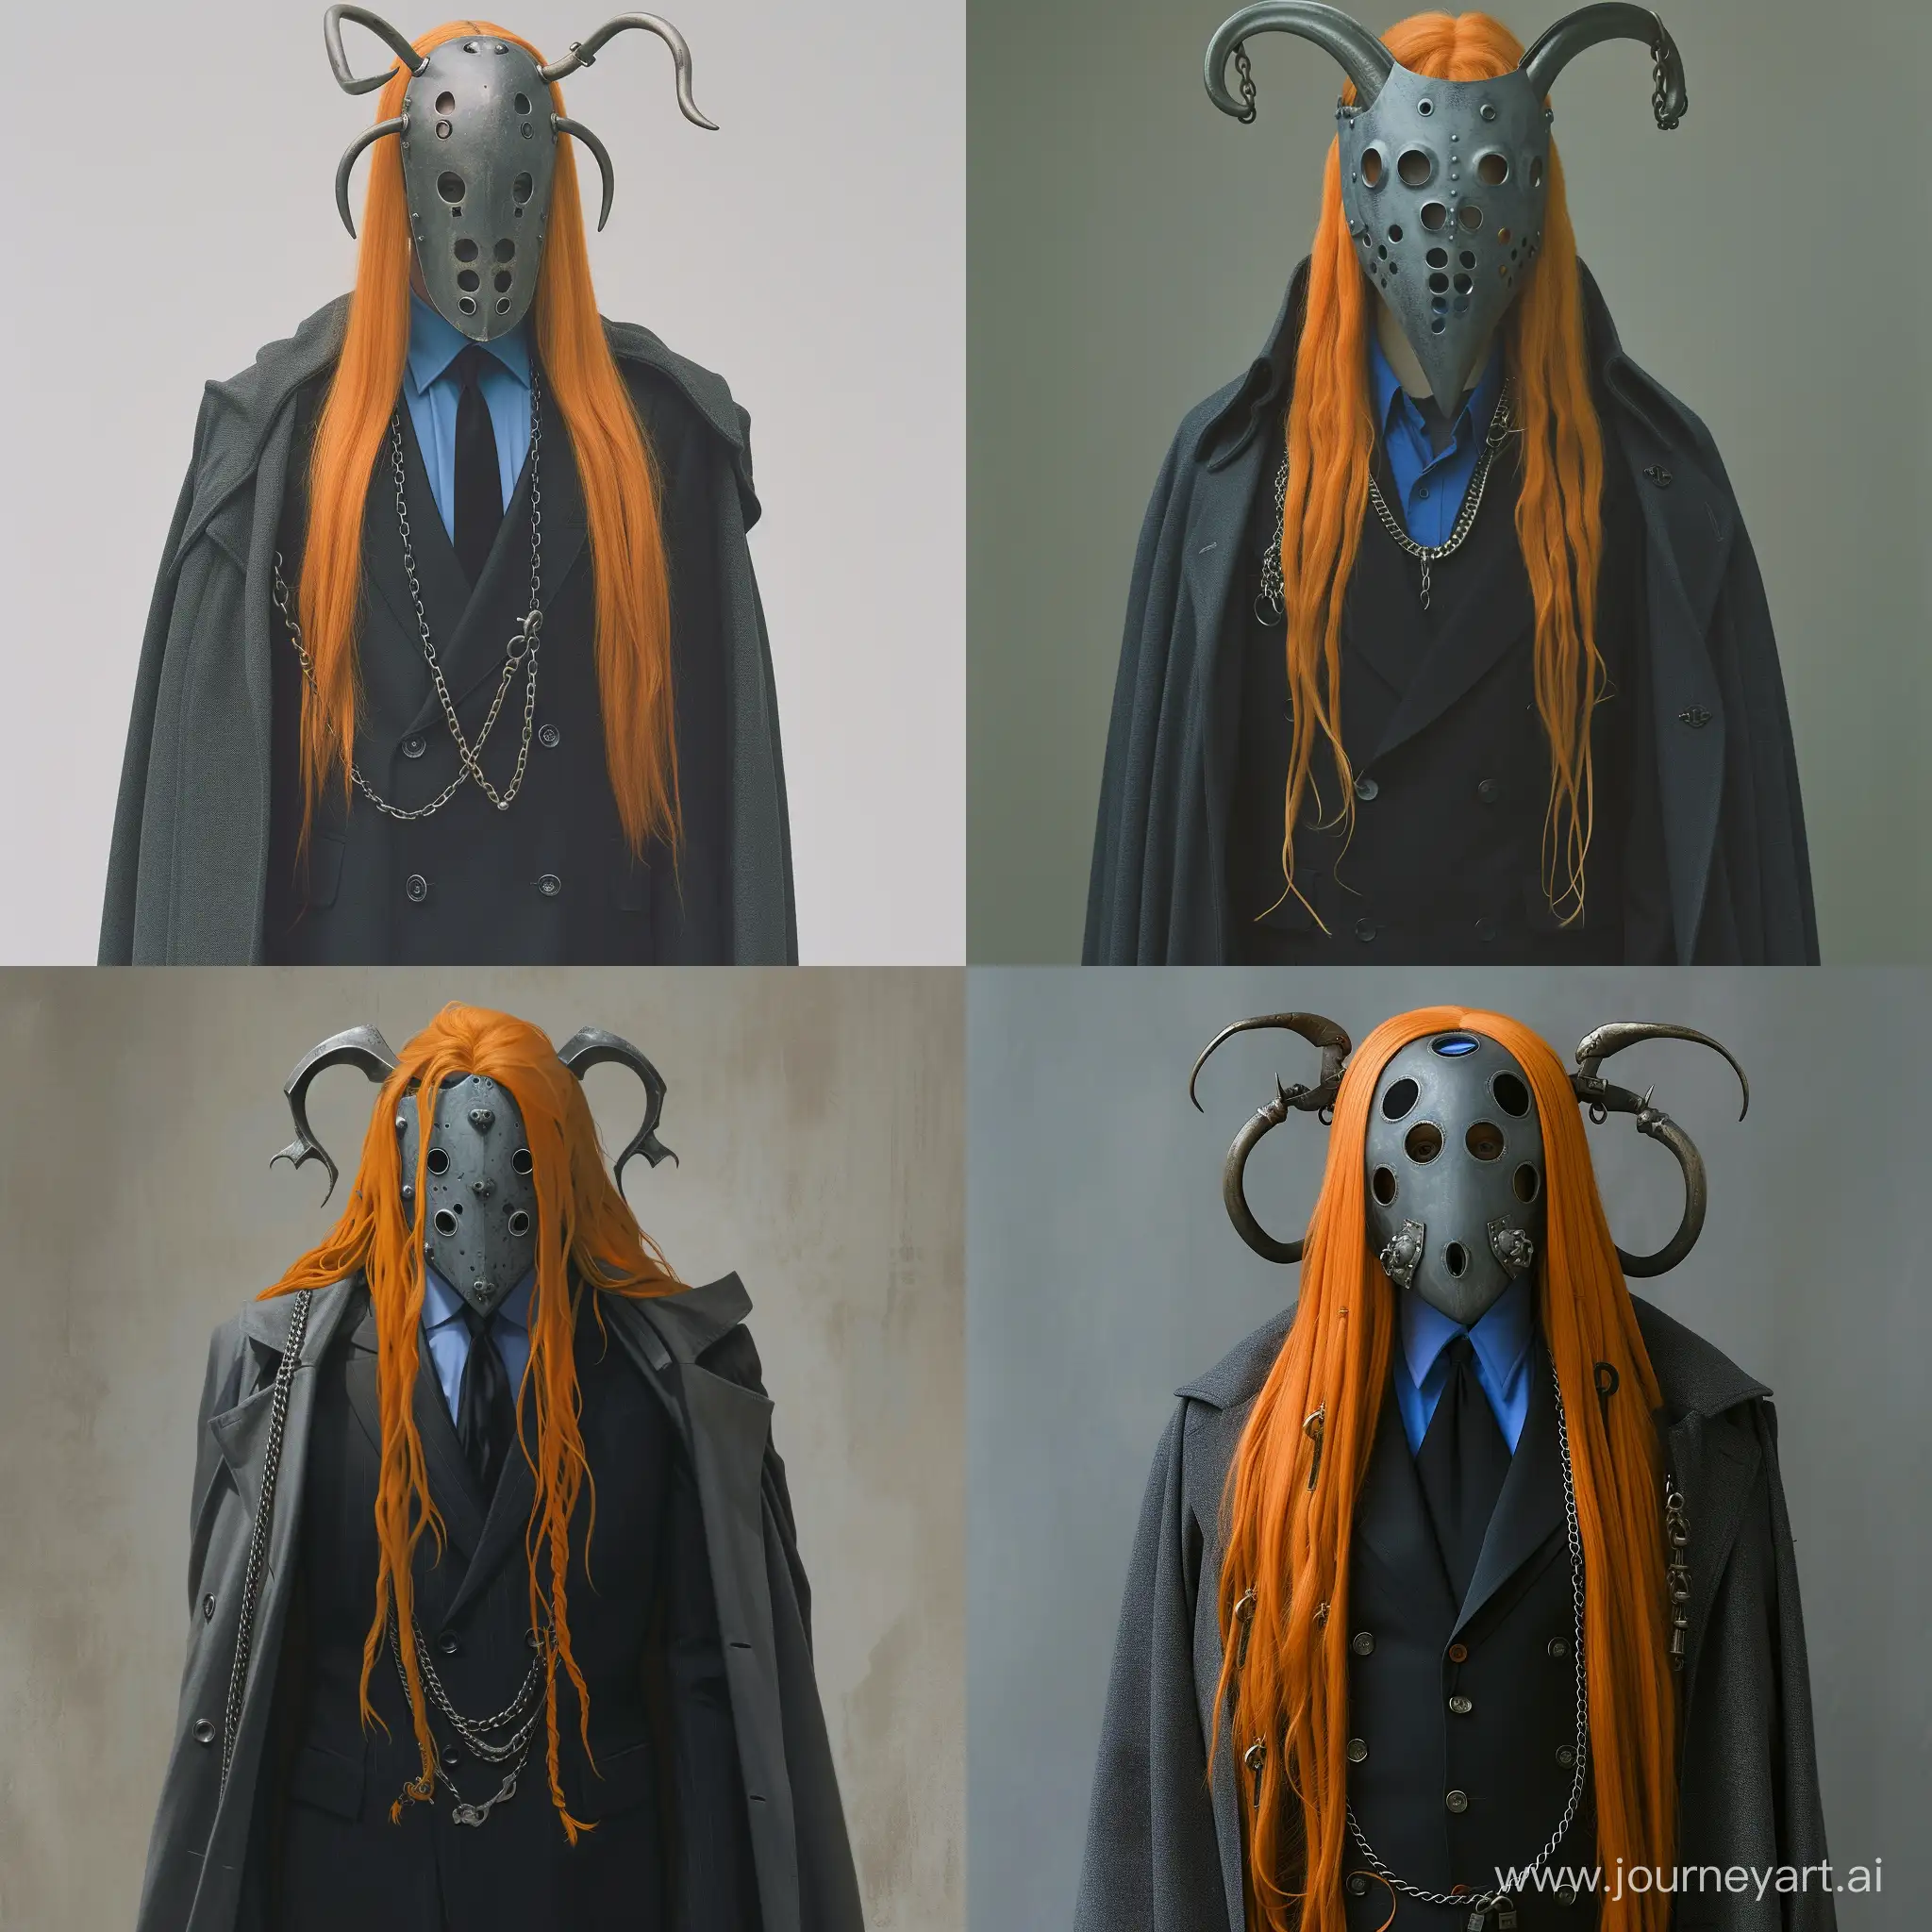 a tall man. He wears a gray metal mask with fourteen eye holes and two long curved bull horns, and his face has never been completely exposed. His long orange hair falls over his chest and the rest runs down his back. He wears a double-breasted black suit with a blue shirt and black tie, a coat draped over his shoulders, and a chain around his neck.